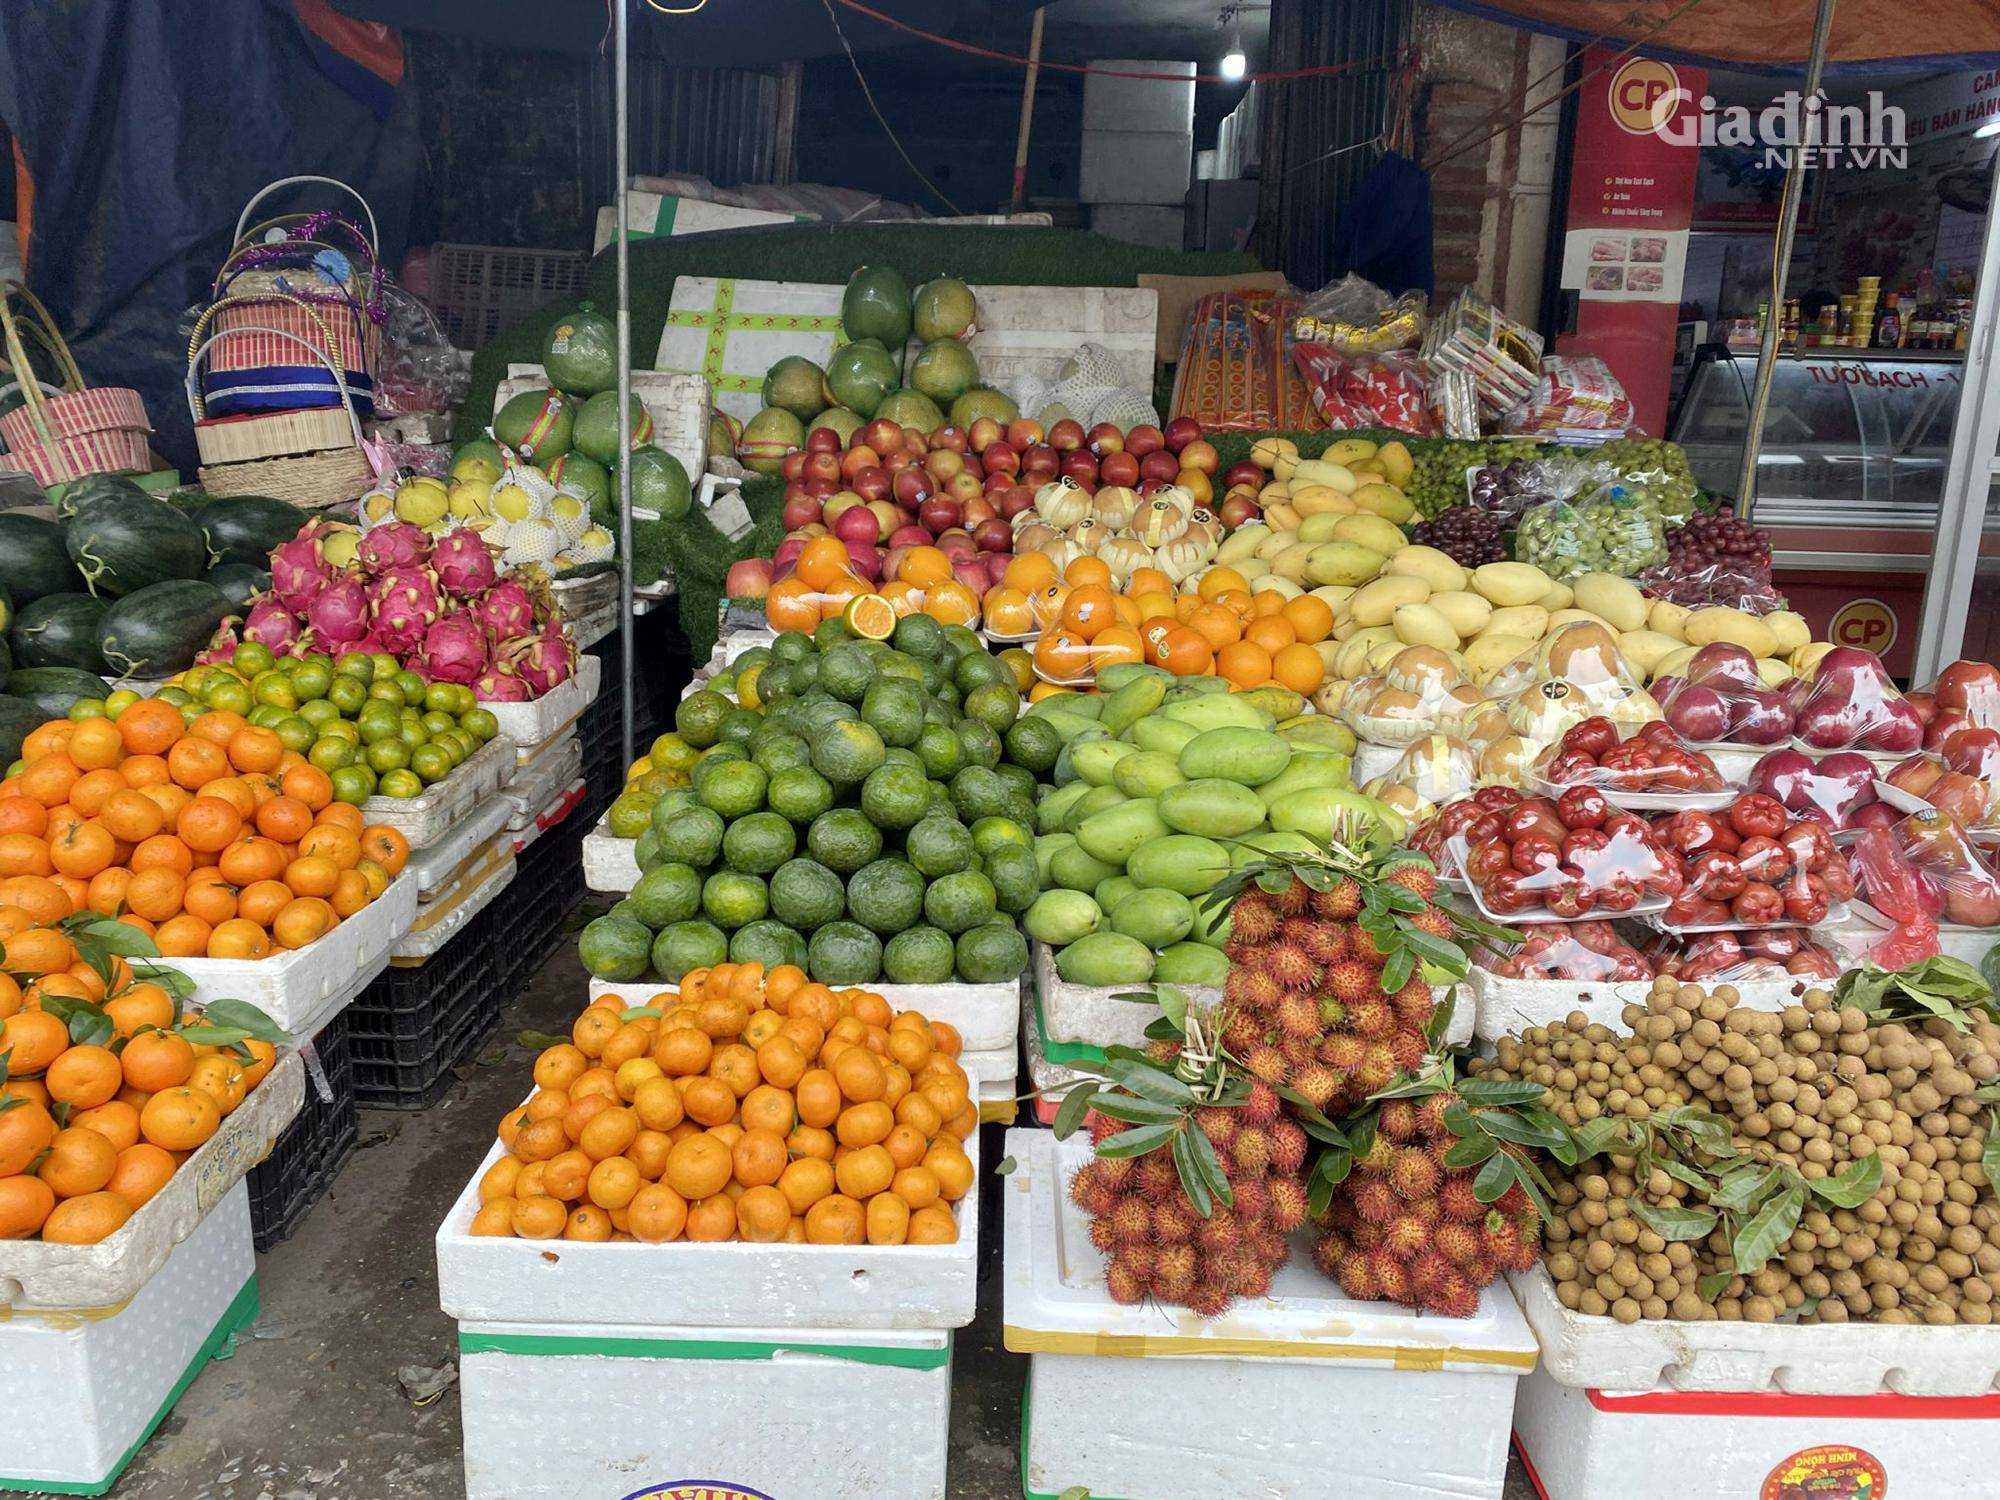 Chinese fruit is sluggish, Vietnamese goods cost from 7,000 VND/kg as expensive as hot cakes - 3